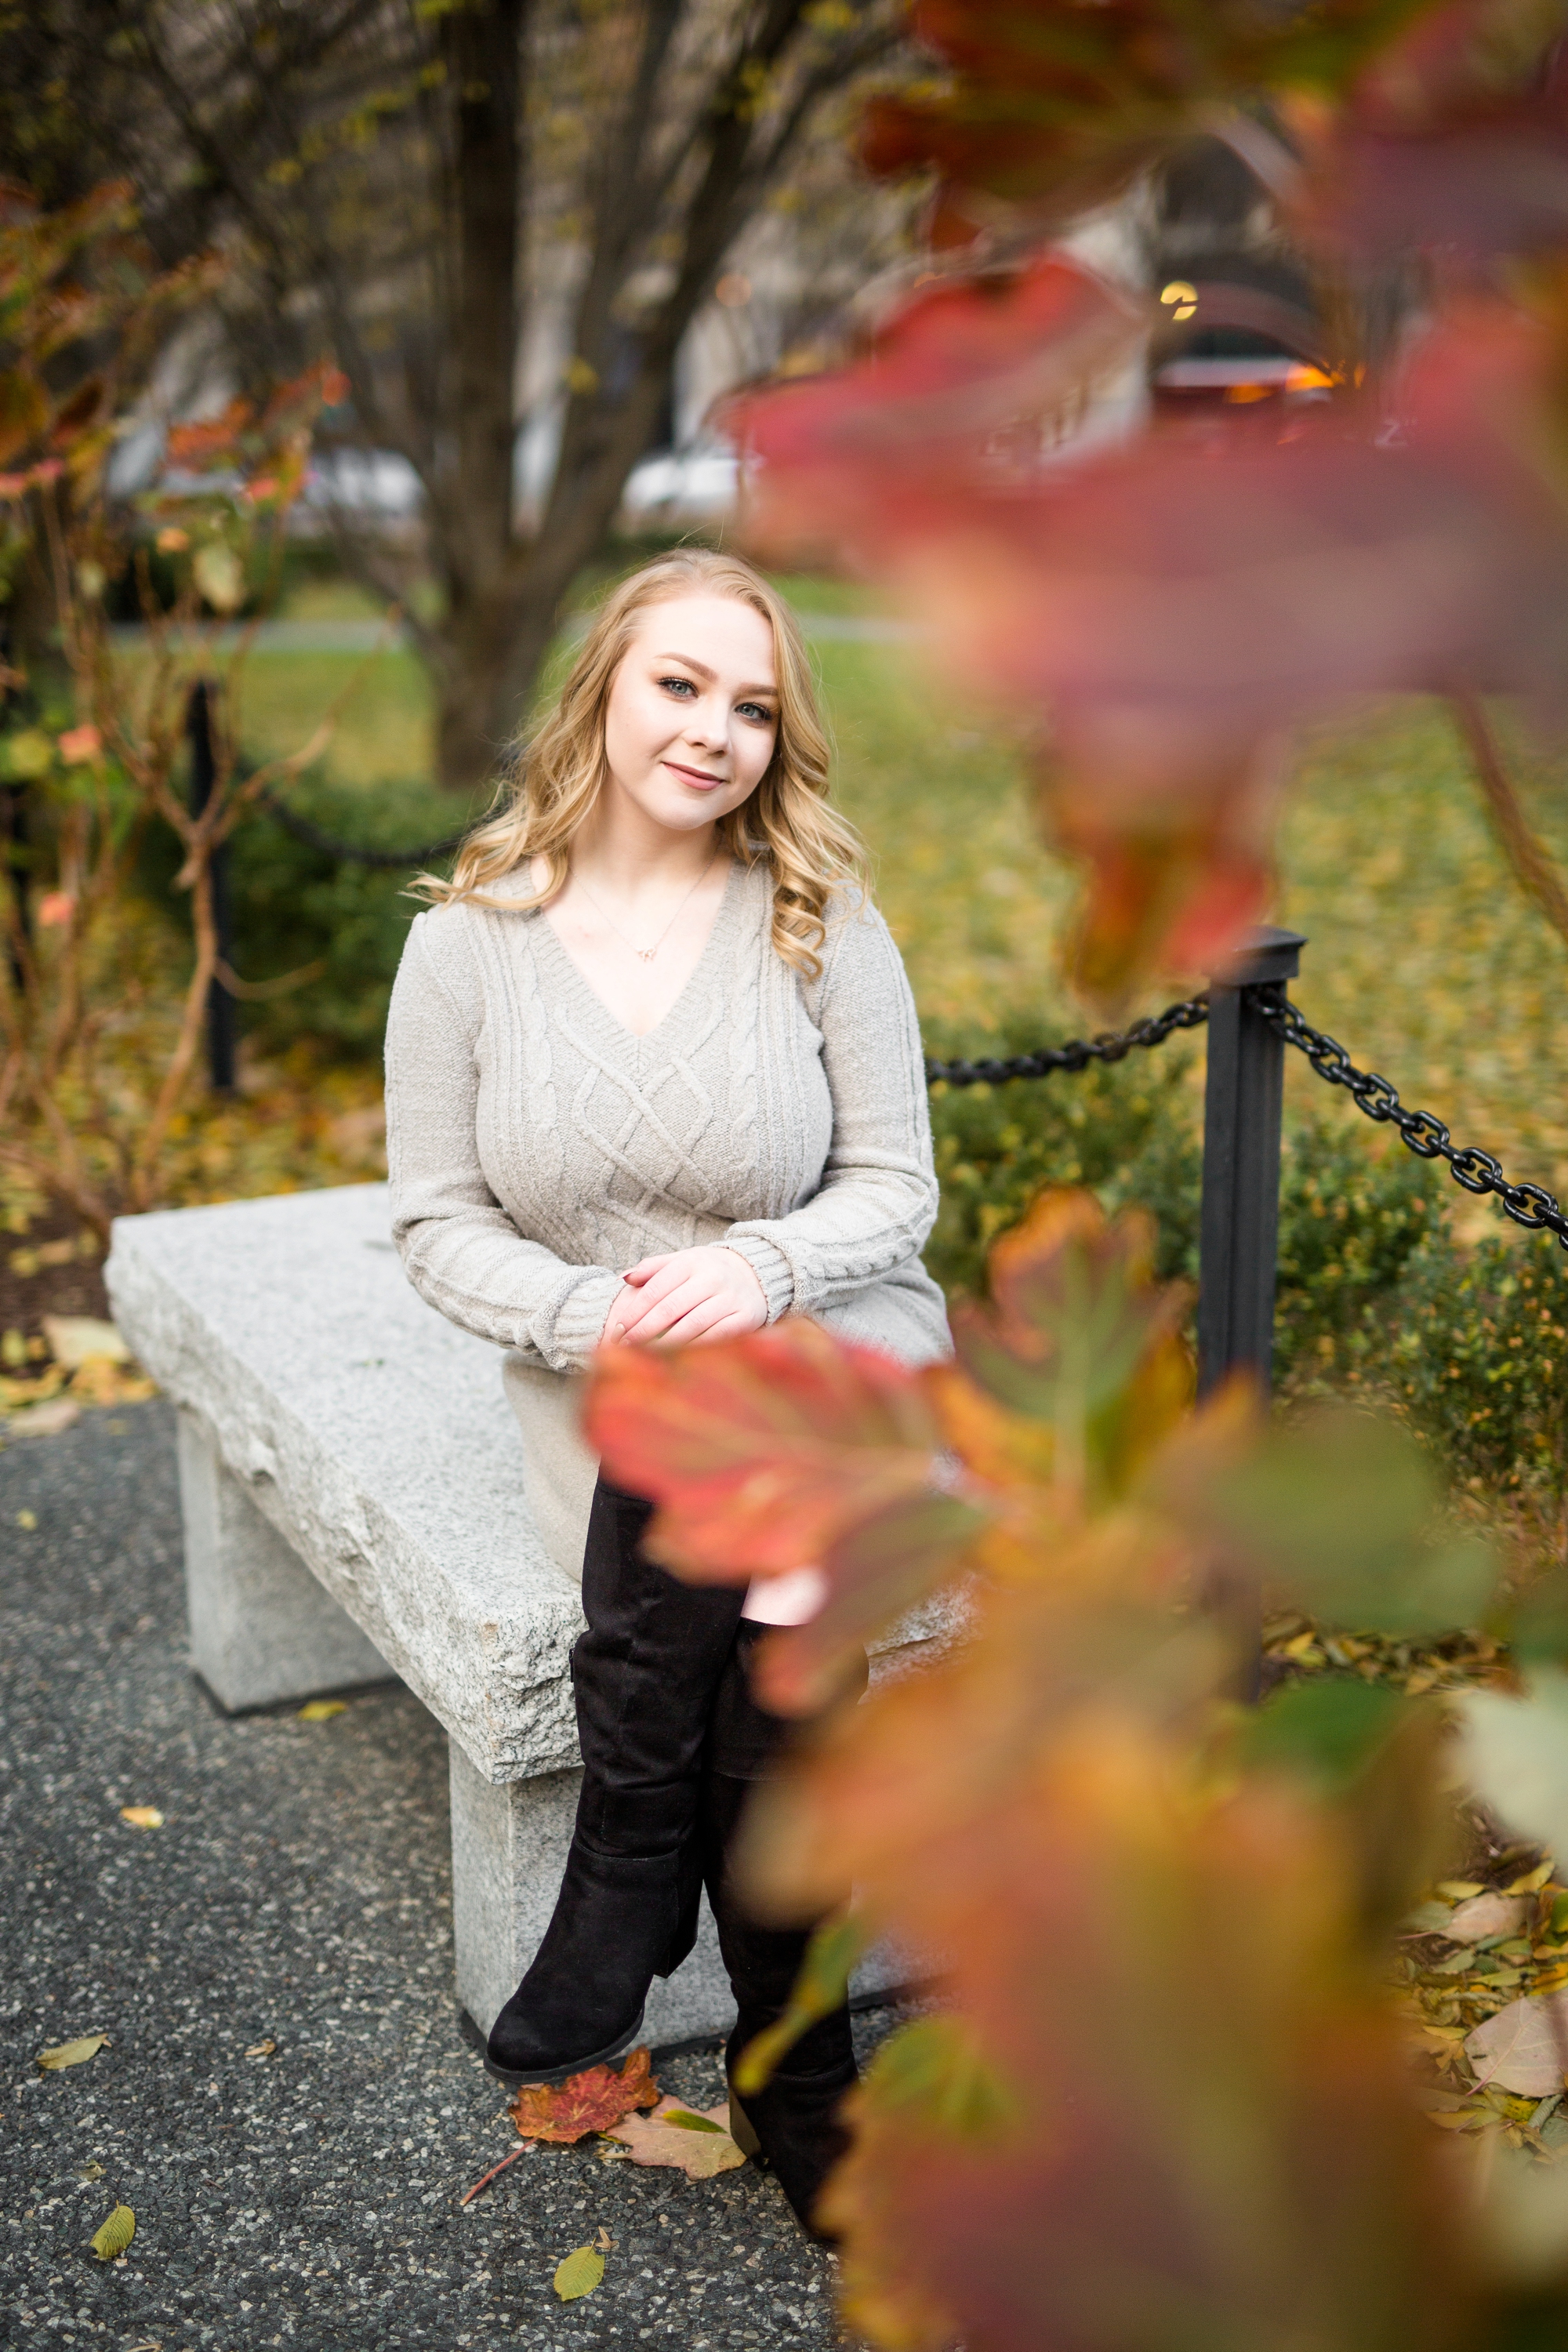 pittsburgh senior pictures, downtown pittsburgh senior photos, pittsburgh senior photographer, cranberry township senior photographer